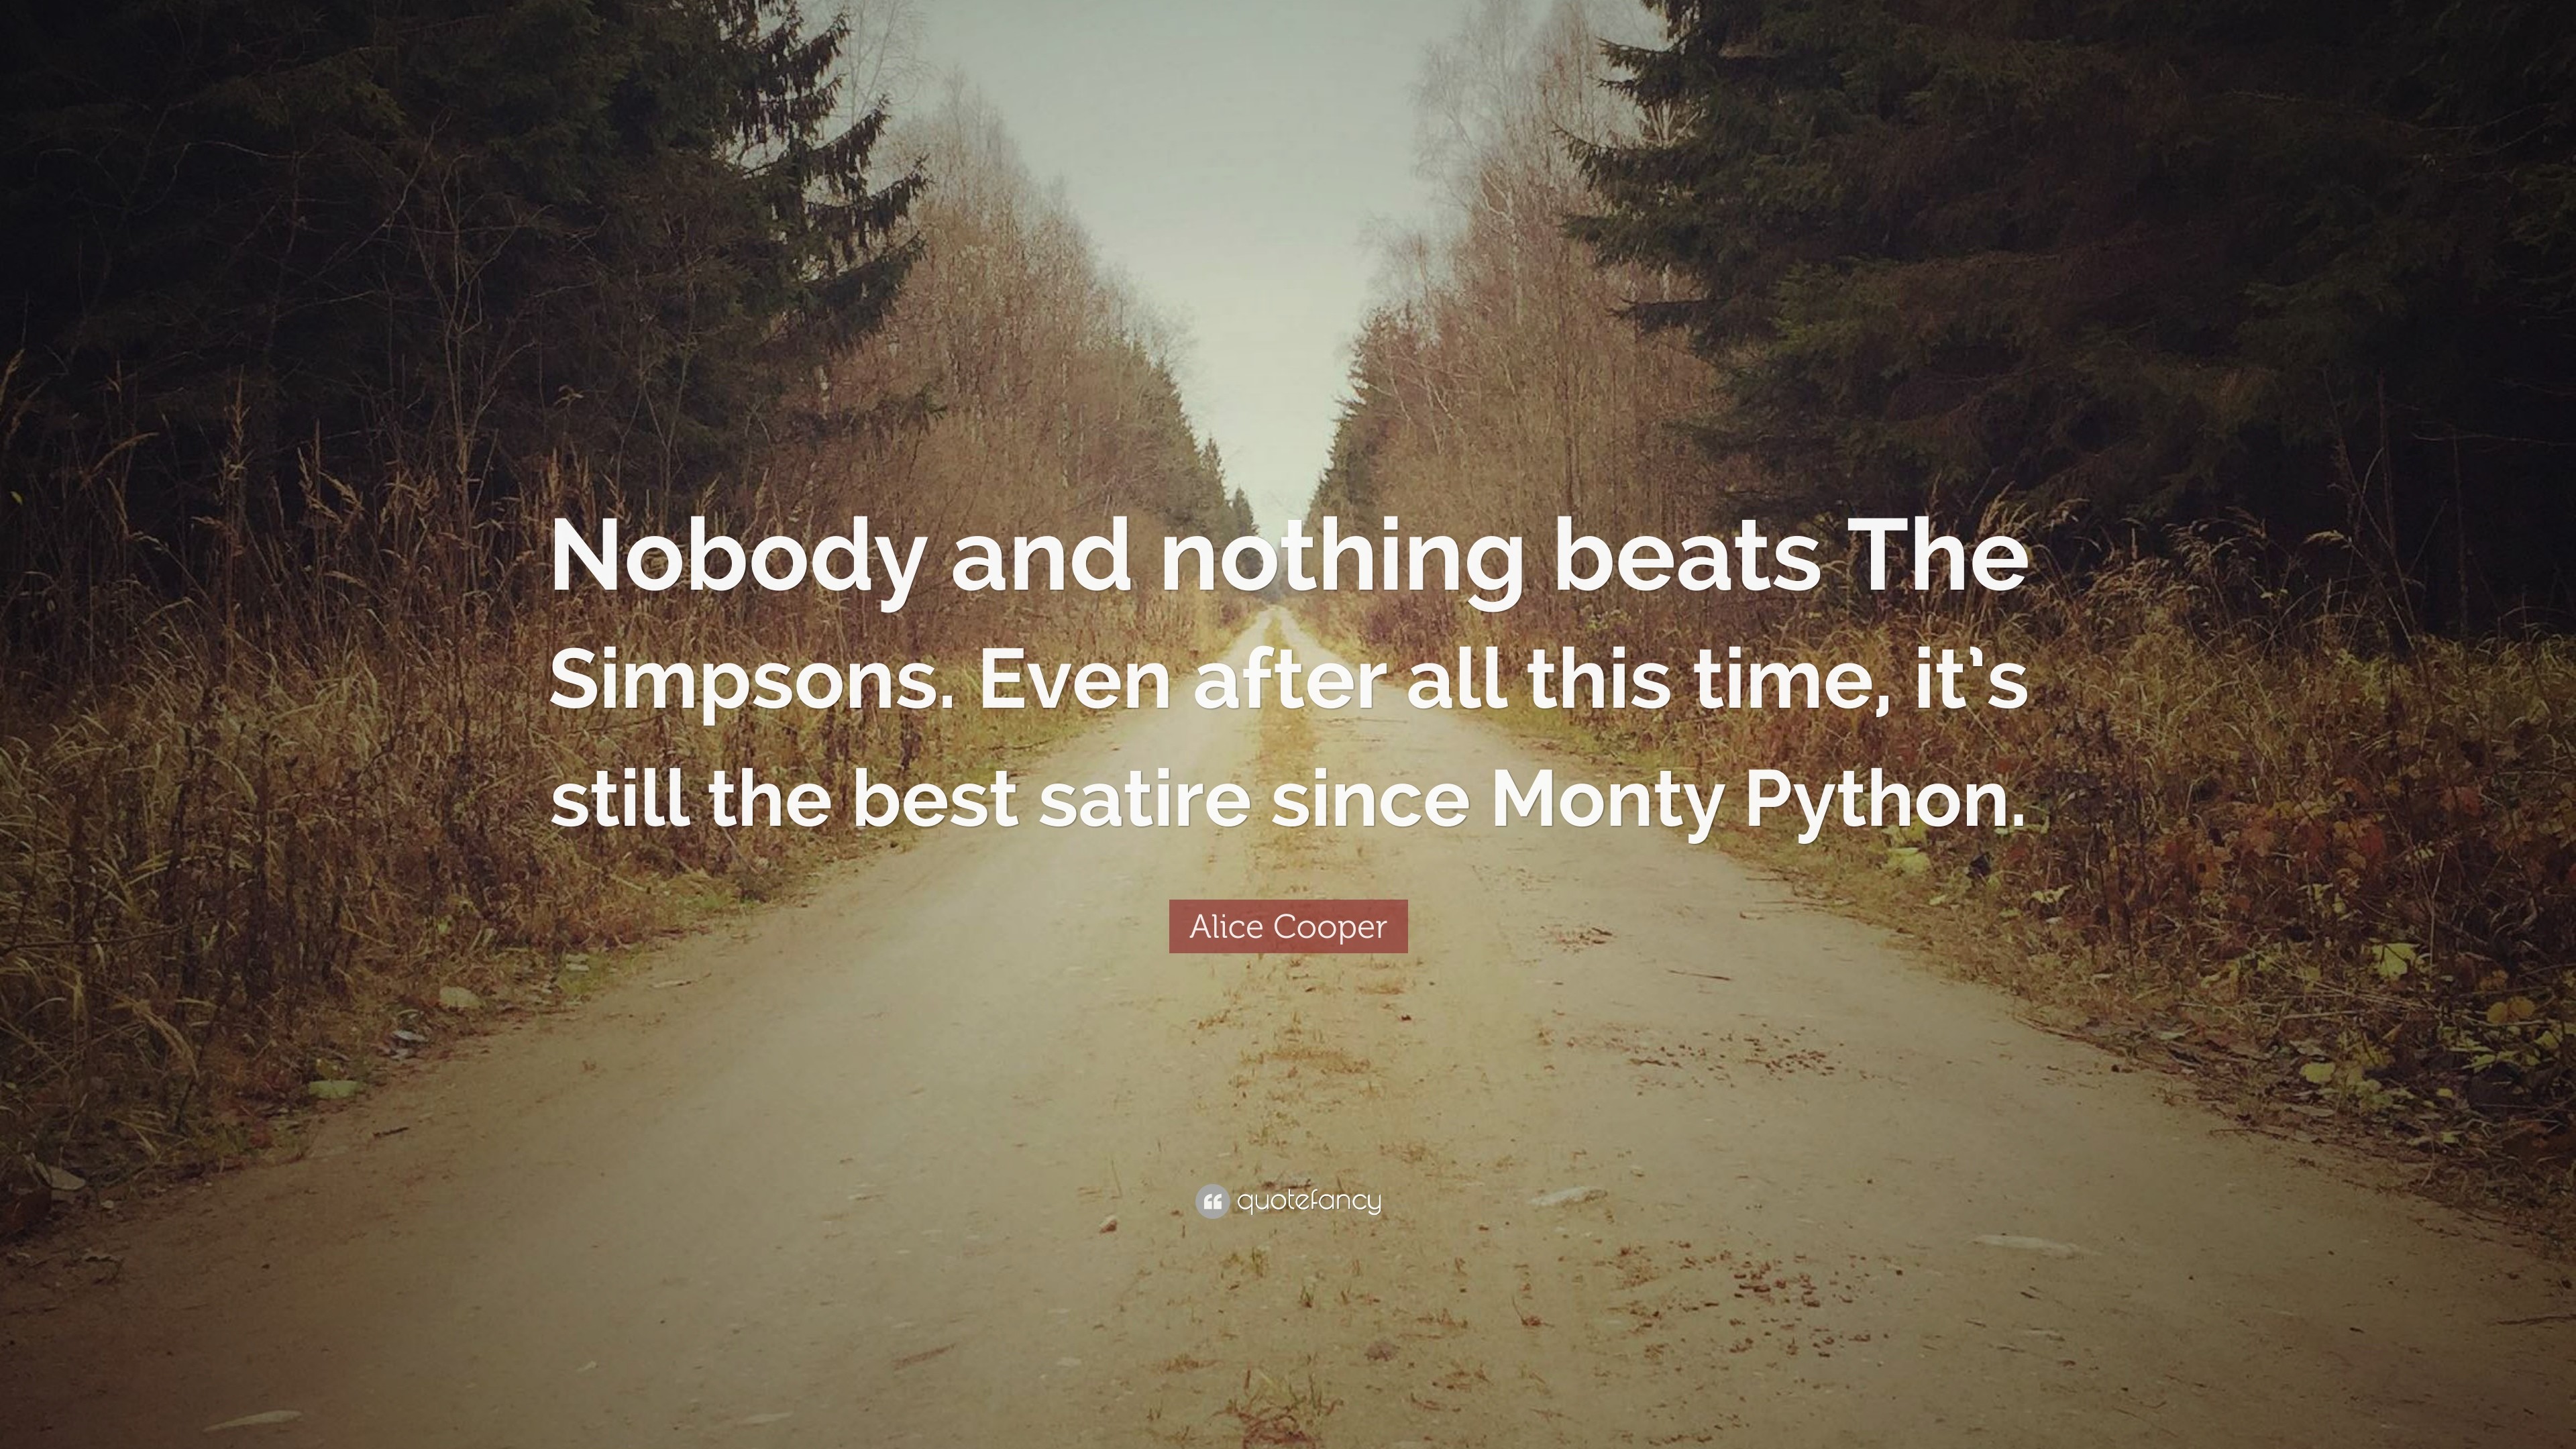 3840x2160 Alice Cooper Quote: “Nobody and nothing beats The Simpsons. Even after all  this